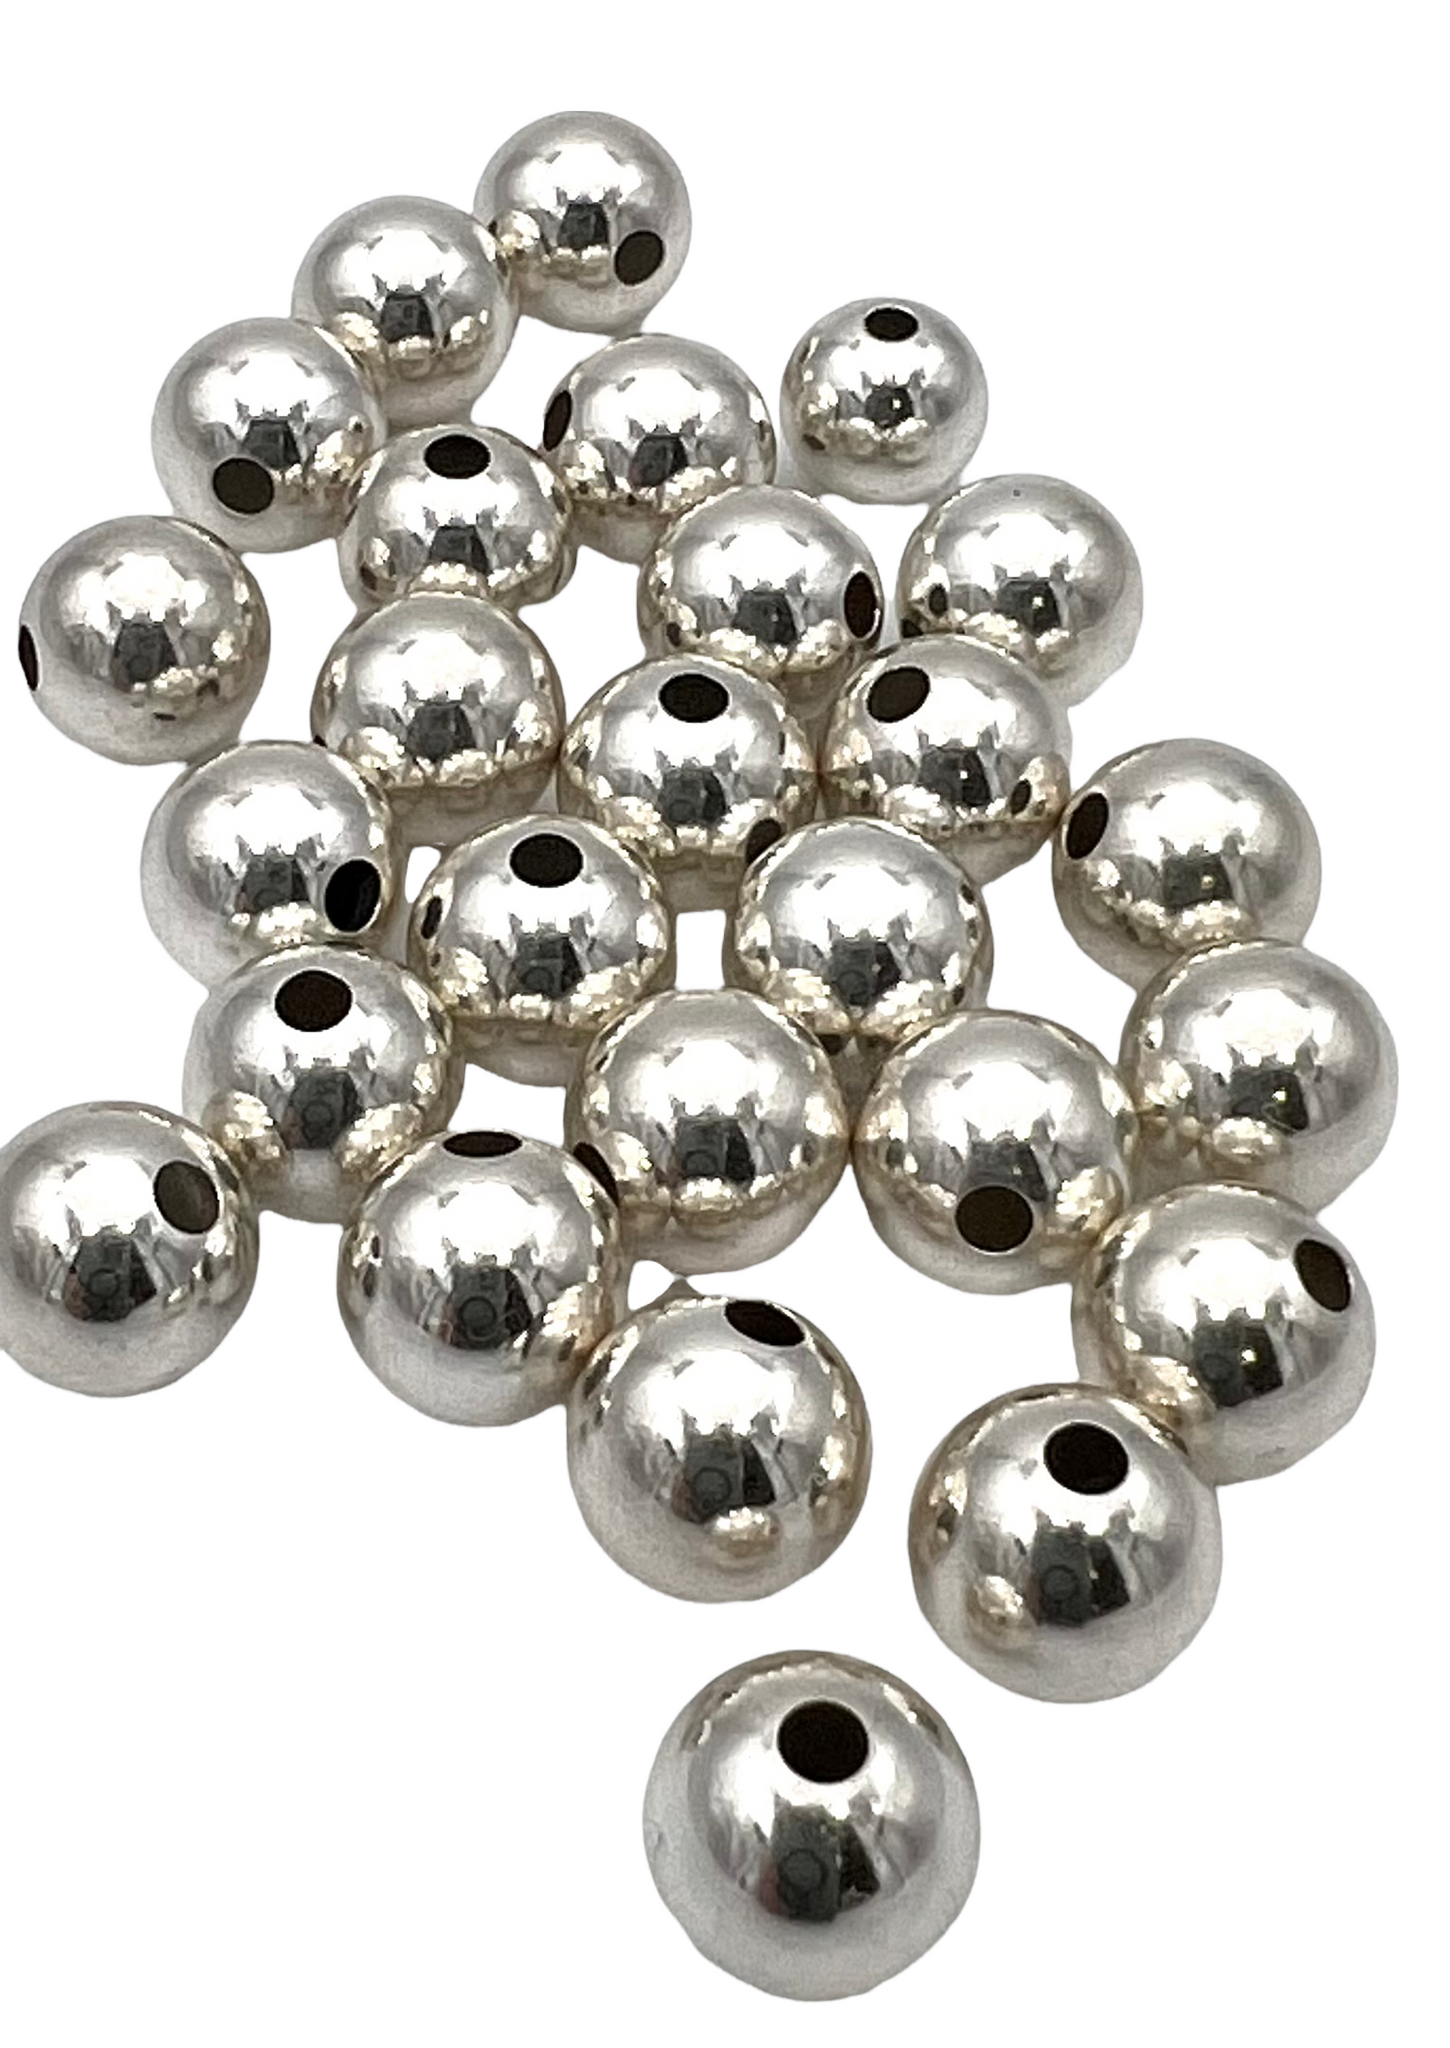 Sterling Silver Round Seamless beads 9mm (PKG of 3 beads) -